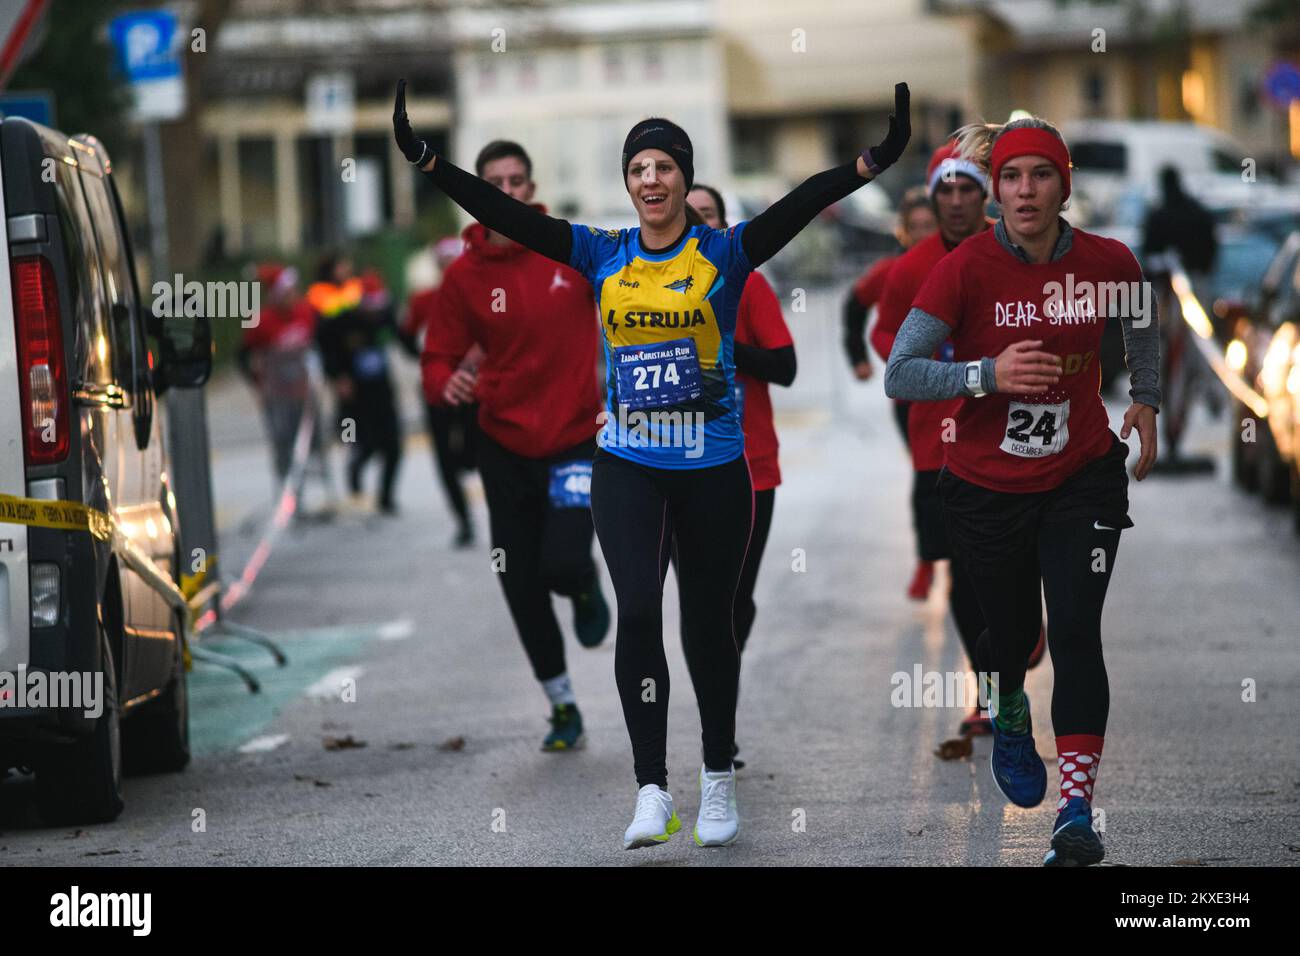 29.12.2019., Croatia, Zadar - The Zadar Christmas Run 2019 charity race was held in Zadar and the portion of the proceeds from the race application will be donated to the Pediatric Department of Zadar General Hospital. Photo: Marko Dimic/PIXSELL Stock Photo